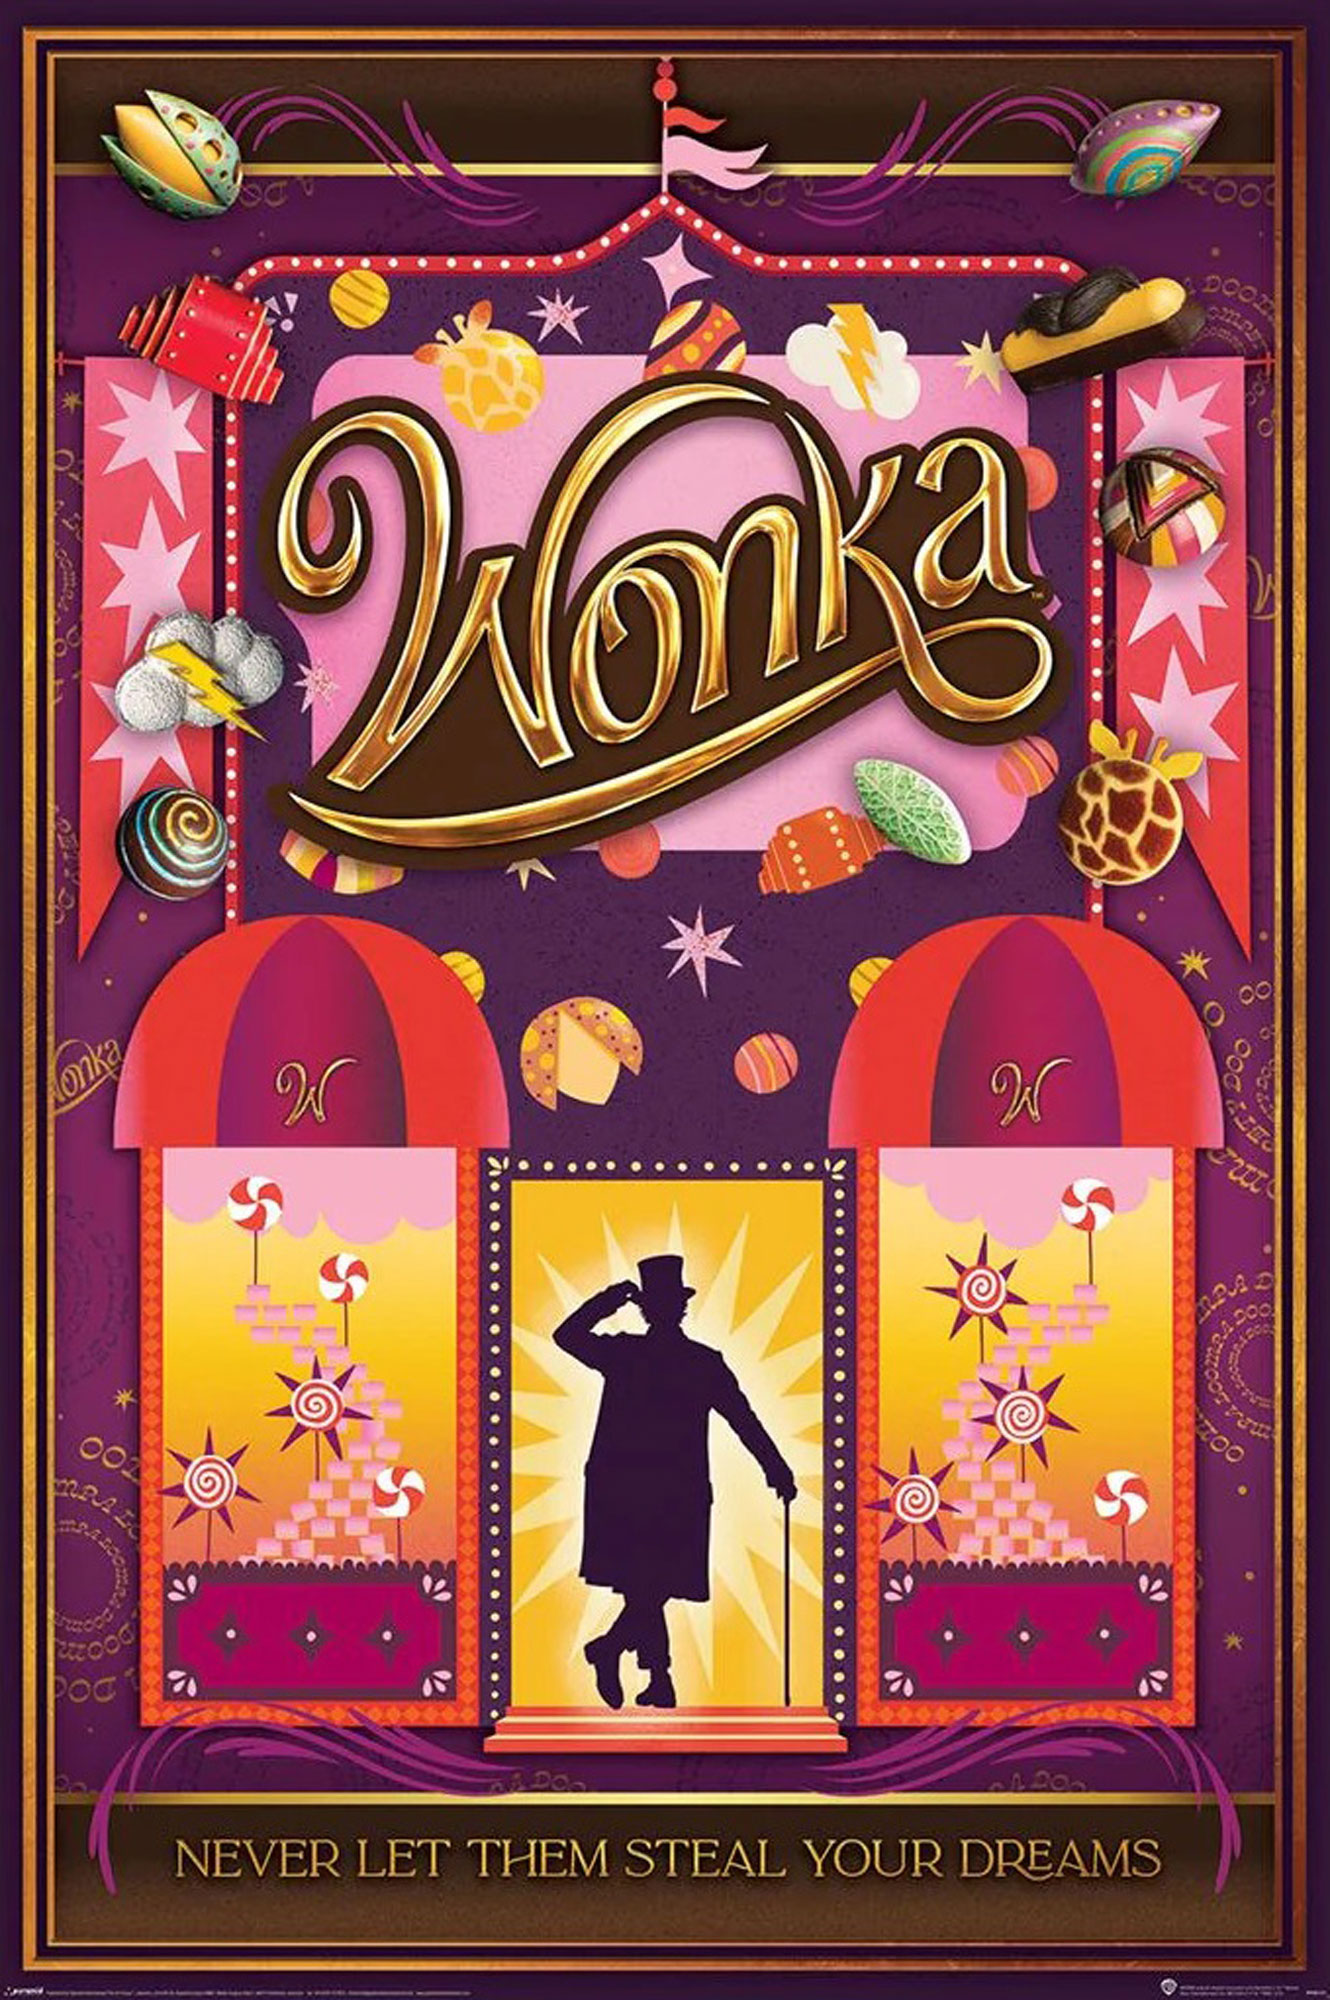 Wonka - Never let steal them Dreams your